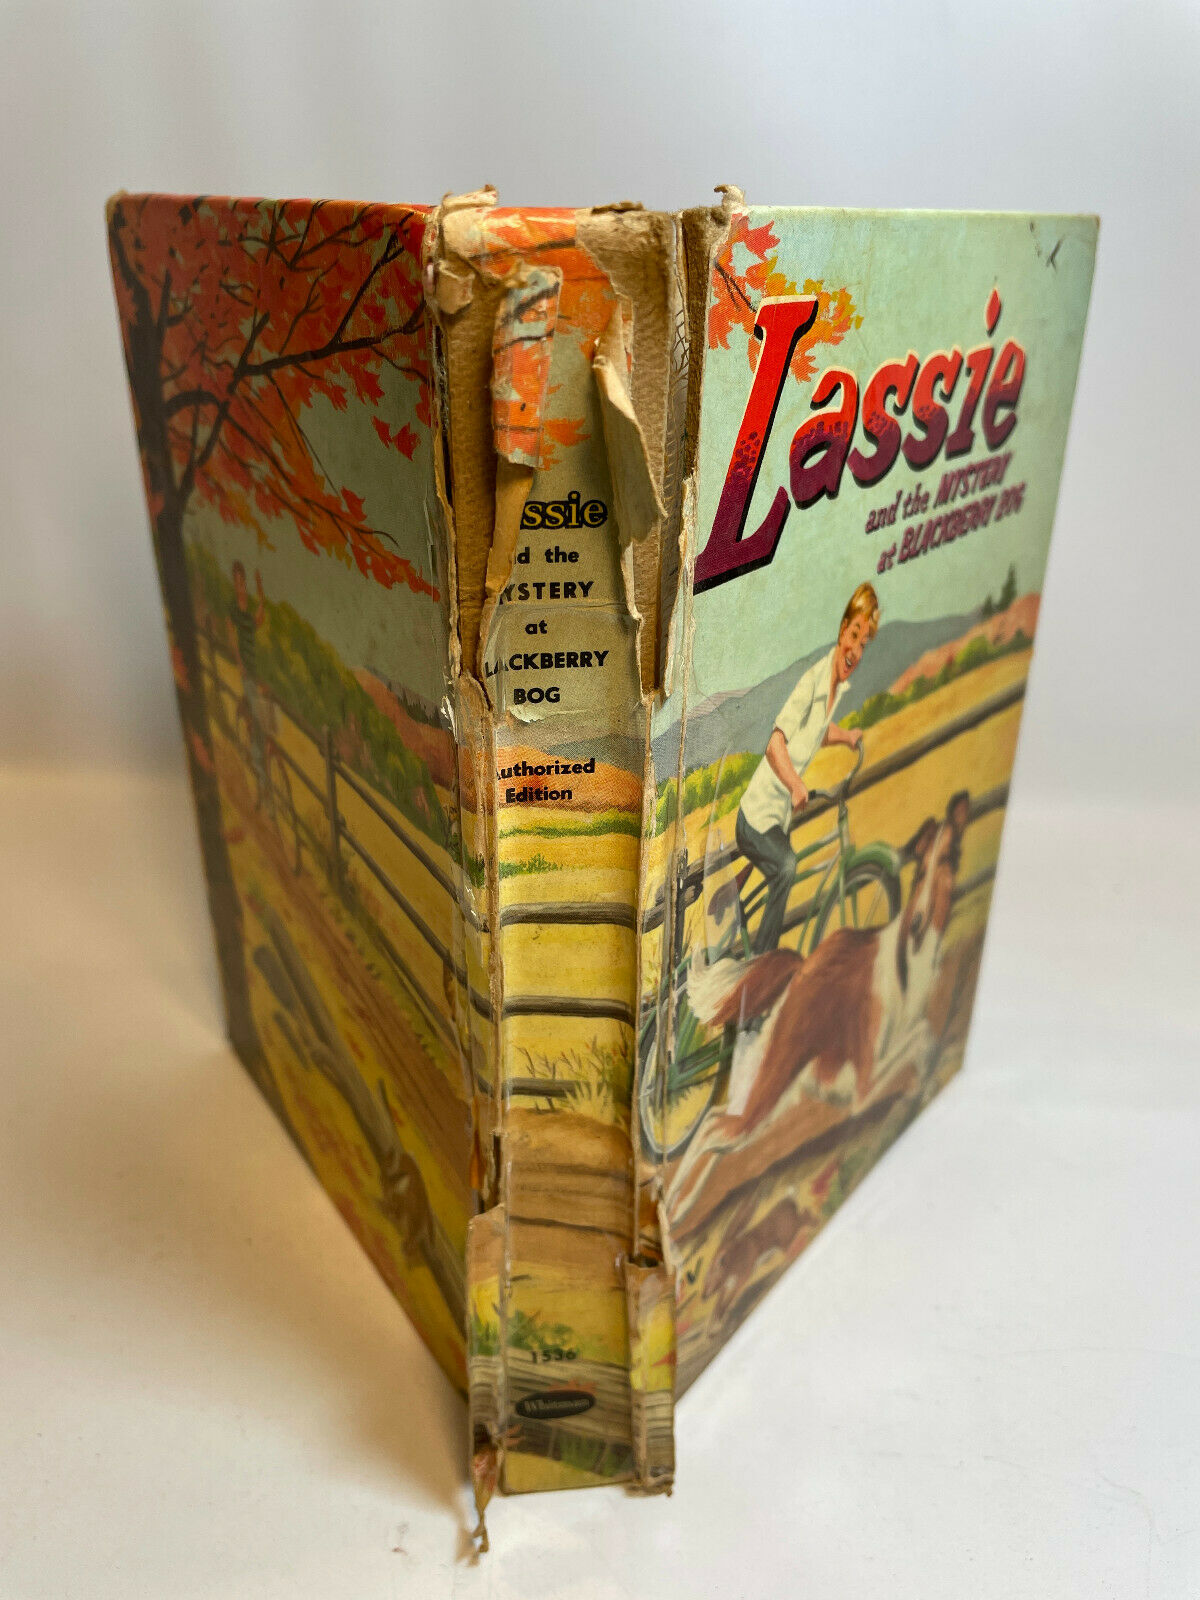 Lassie And The Mystery At Blackberry Bog Book Authorized Tv Edition 1956